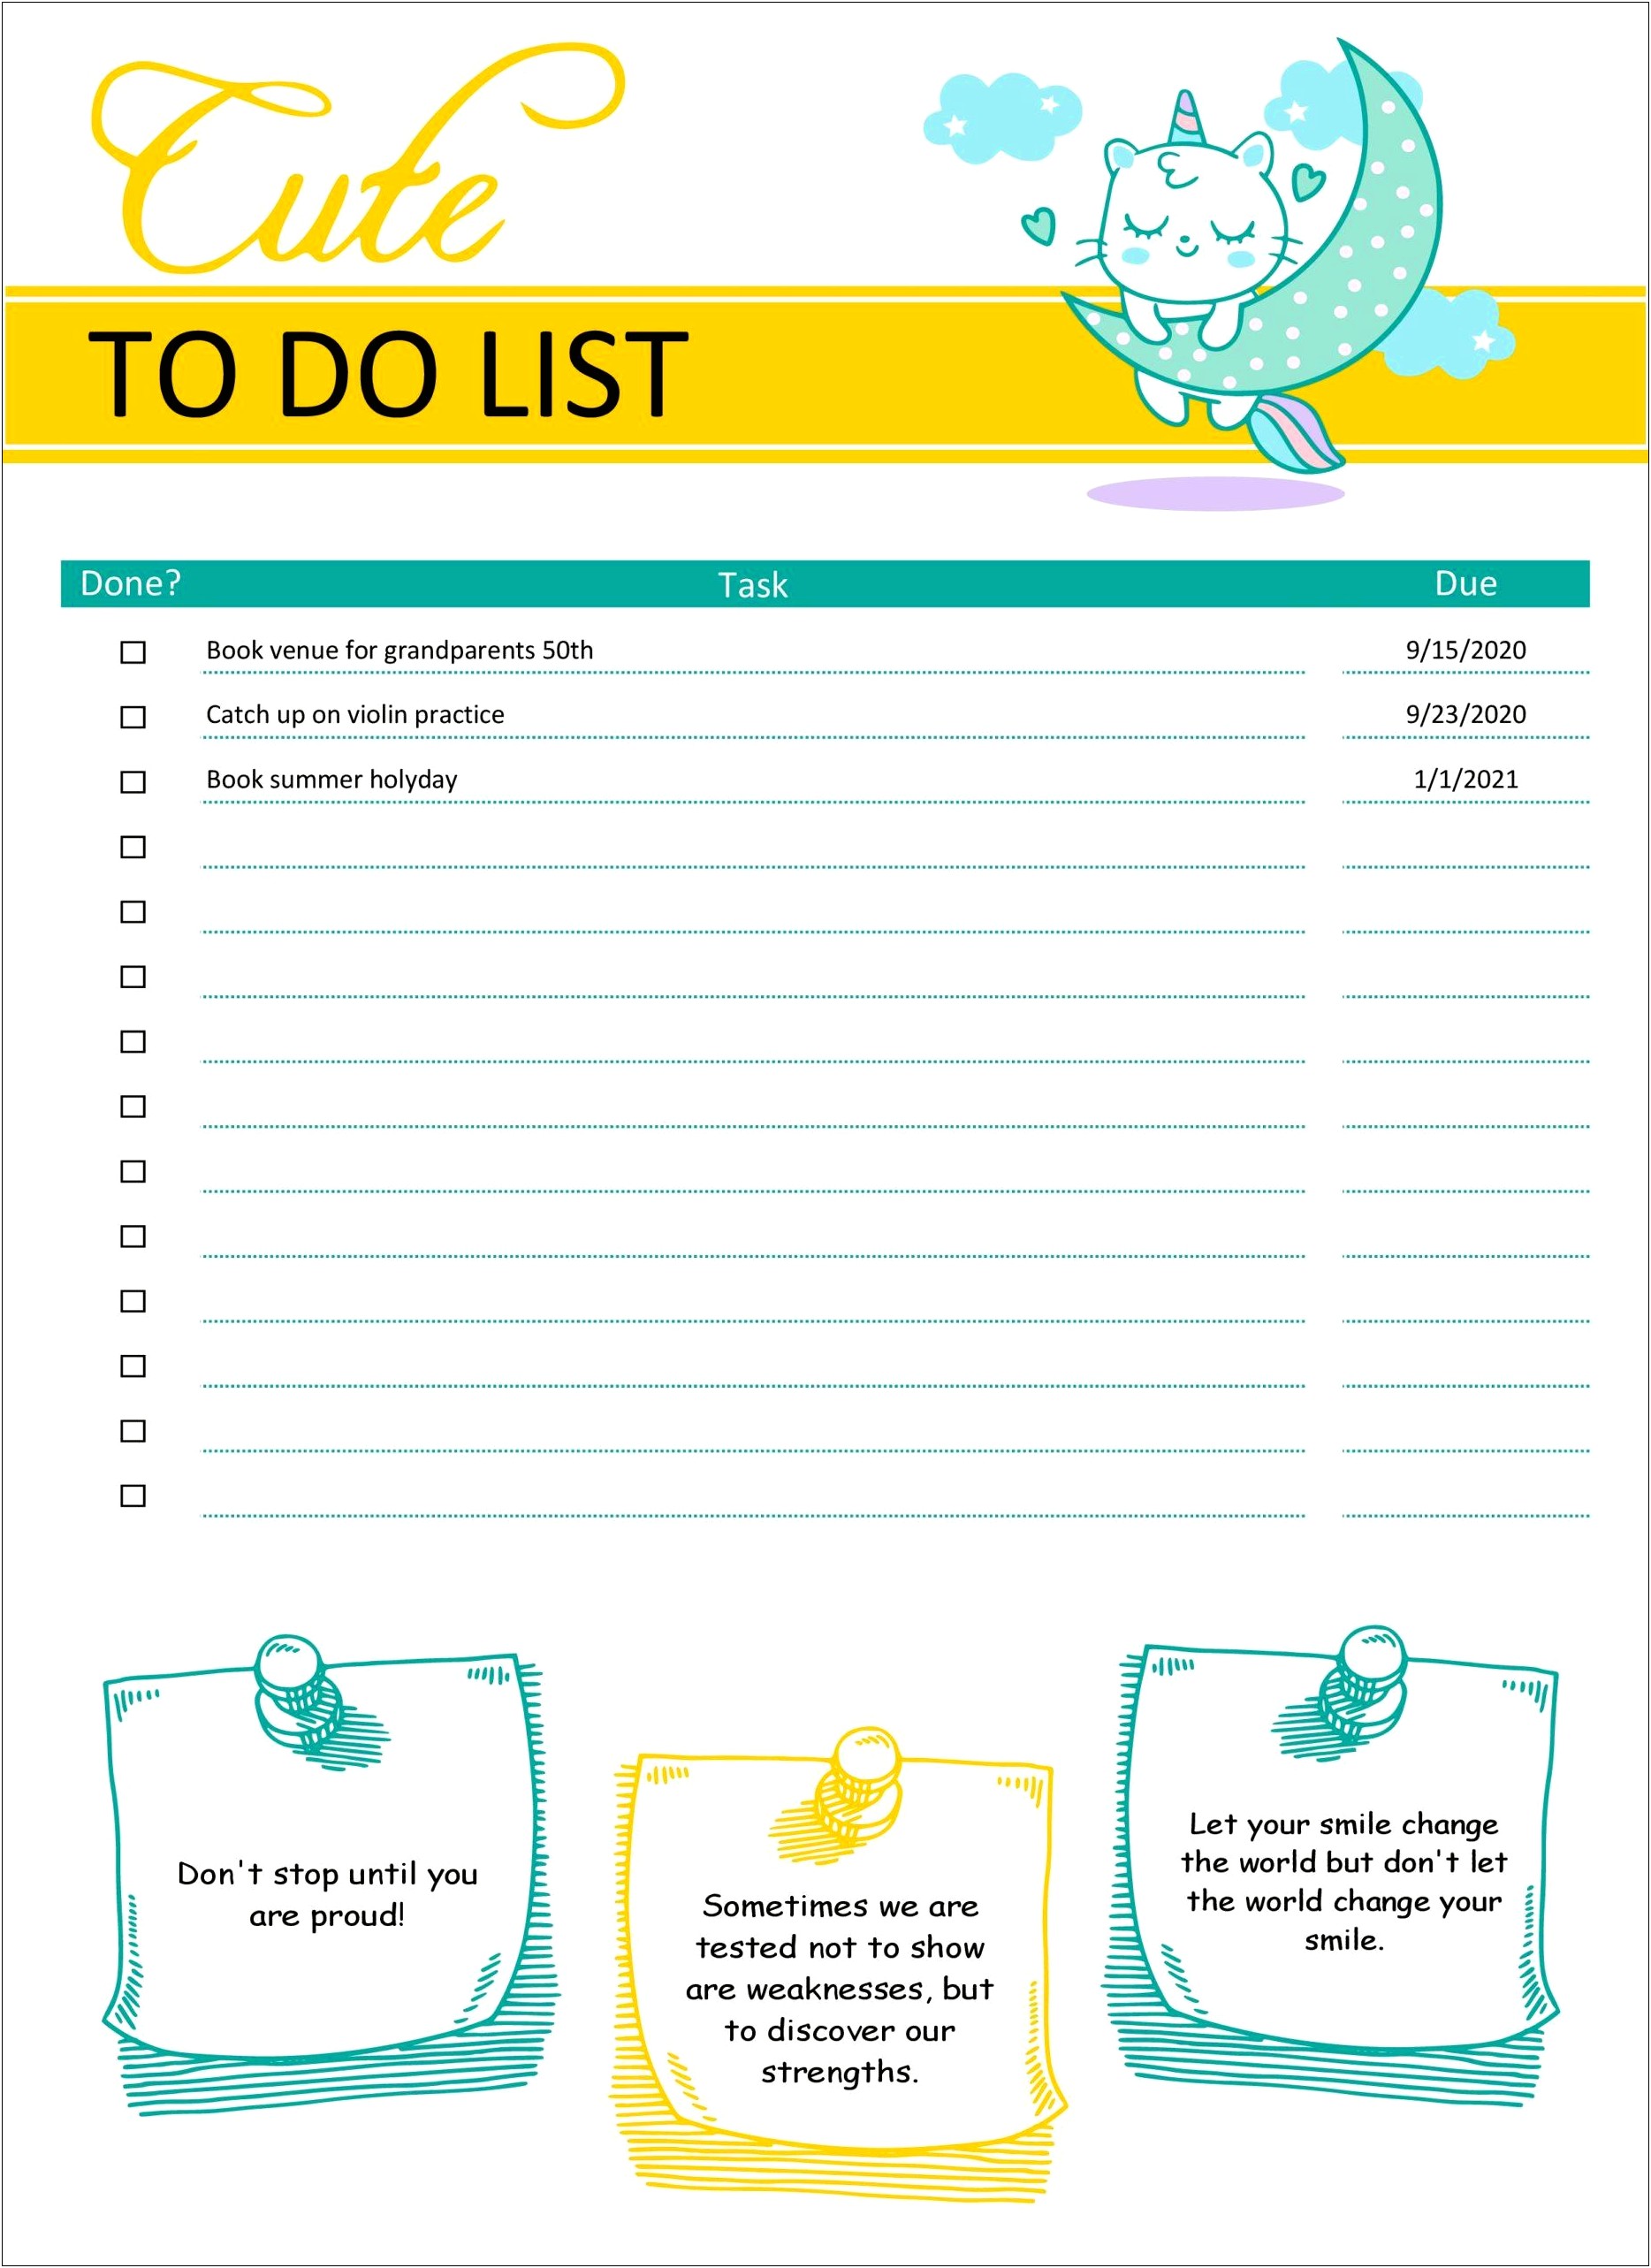 Free Daily To Do List Template